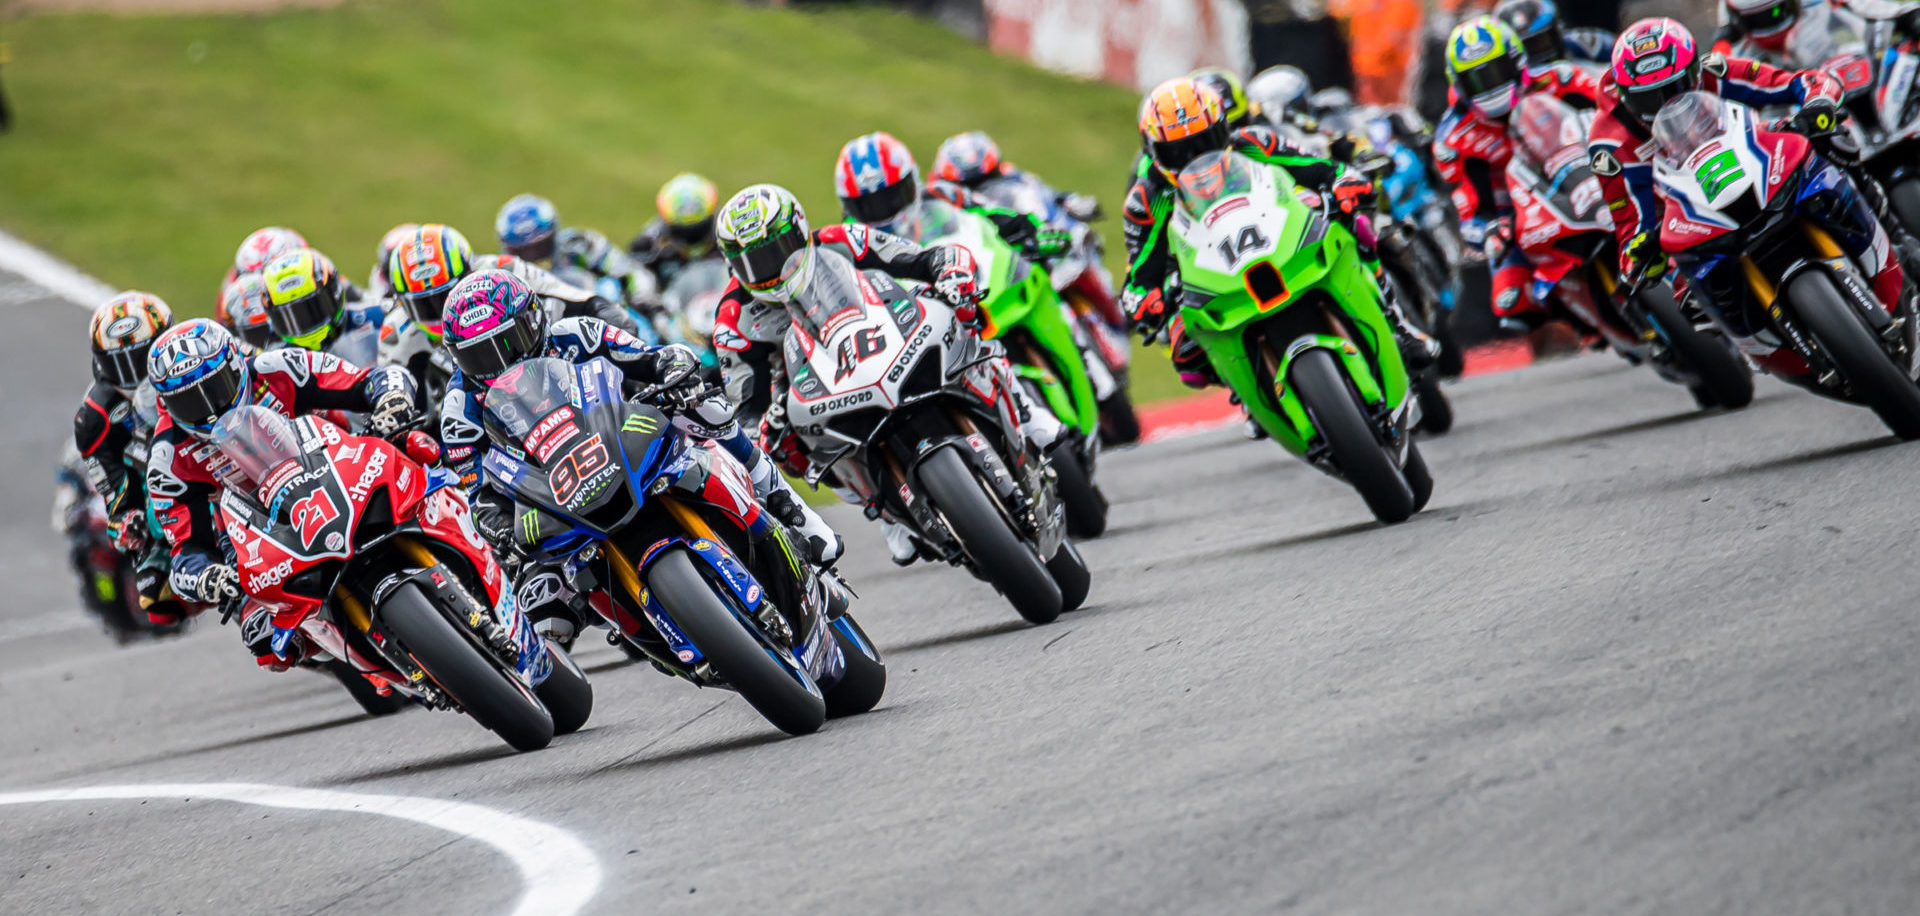 Tarran Mackenzie (95) leads the charge into Turn One during Superbike Race Two at Brands Hatch. Photo by Barry Clay.